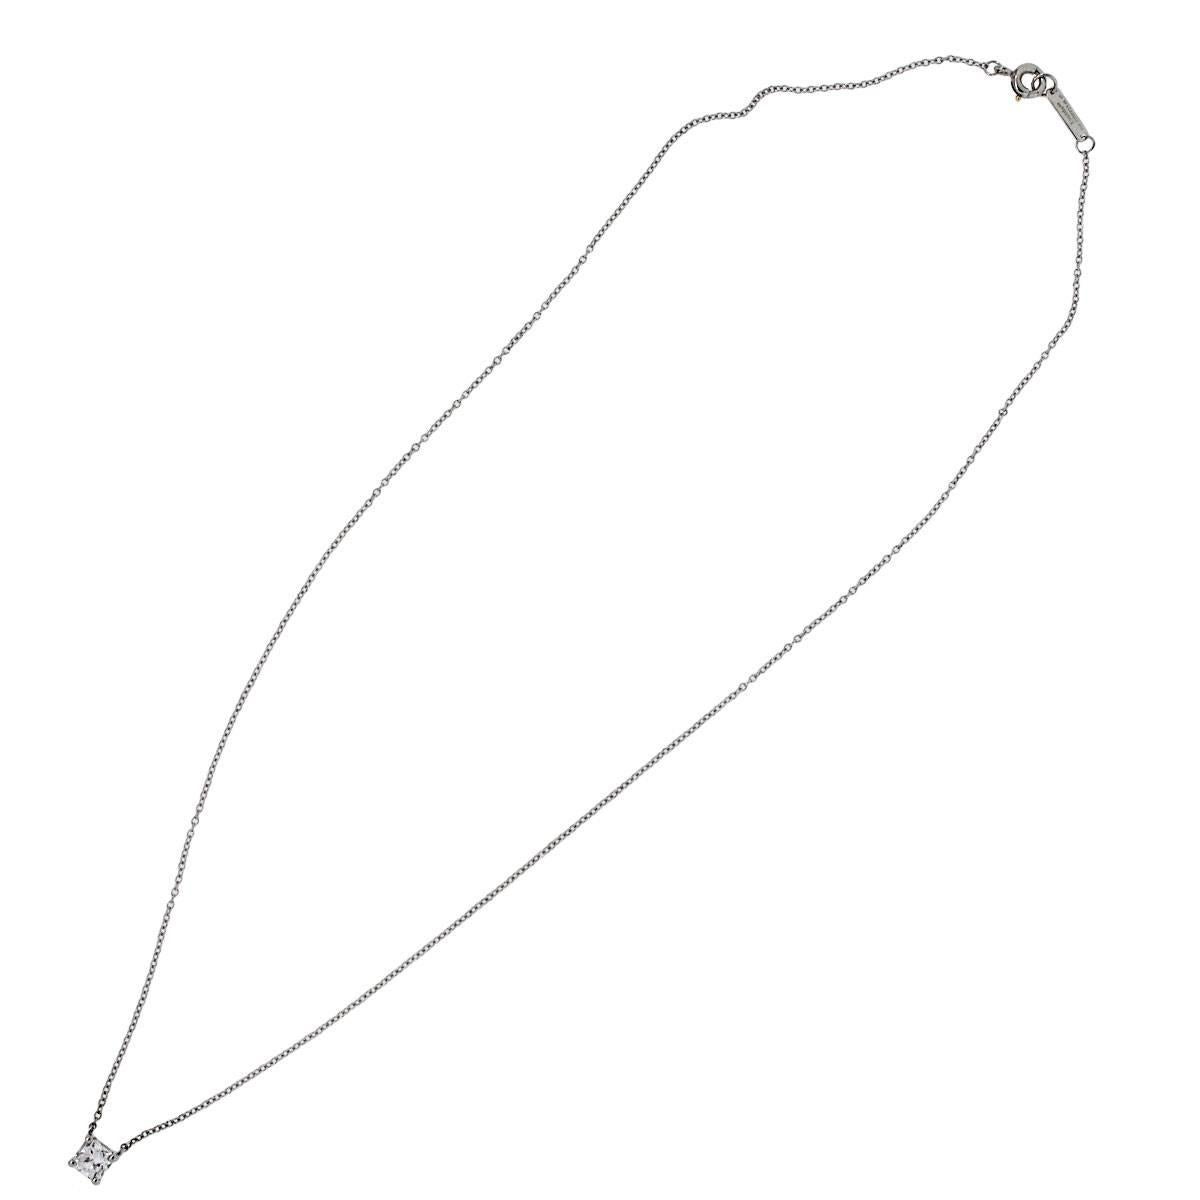 Brand: Tiffany & Co.
Style: Platinum 0.50ct Diamond Lucida Pendant Necklace
Material :Platinum
Diamond Details: 0.50ct Lucida cut diamond. E/F in color and VS in clarity
Total Weight: 1.7dwt (2.7g)
Necklace Length: Chain is 16.5''
Pendant